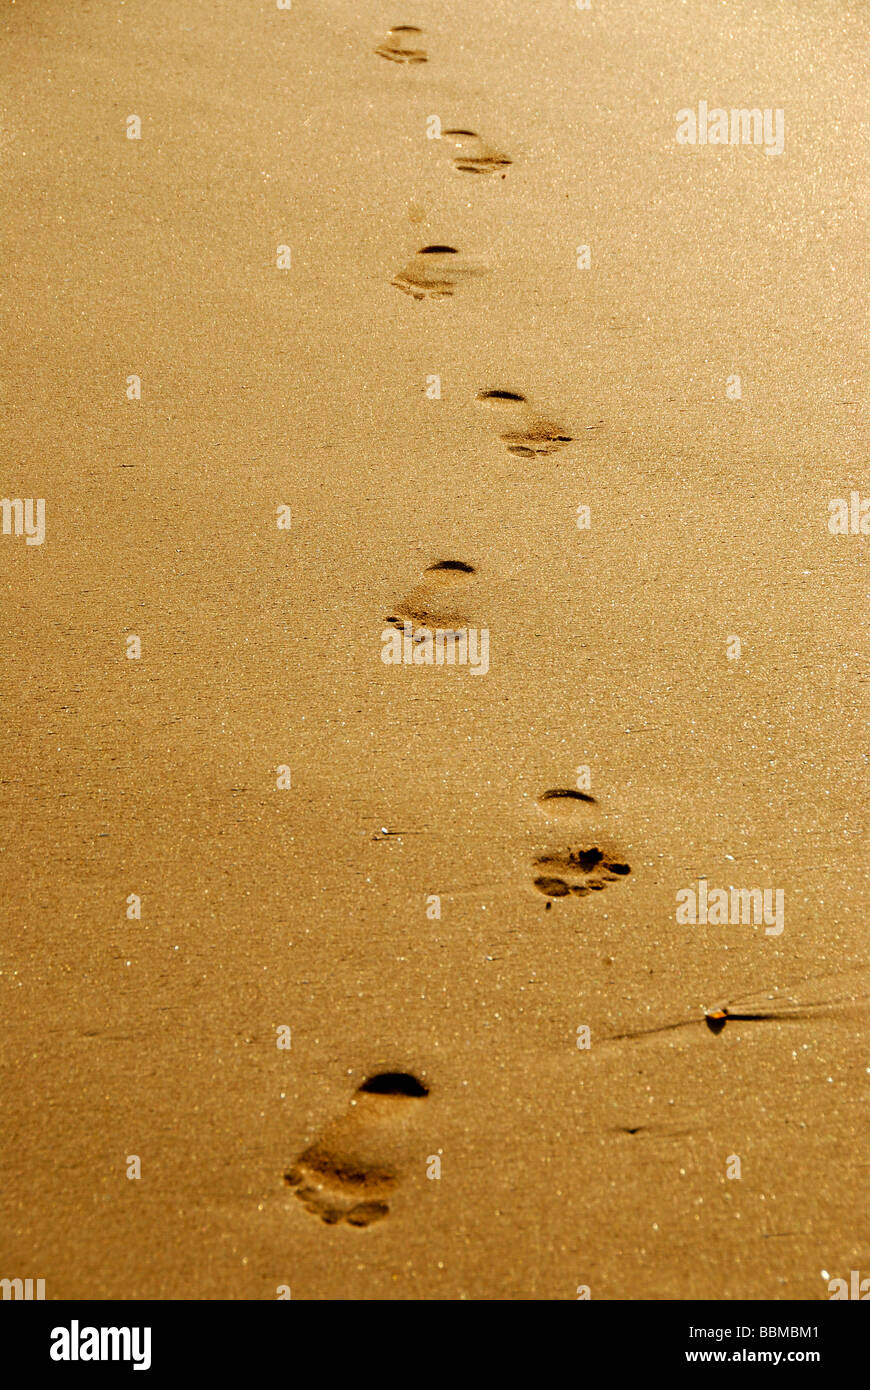 Foot prints in sand, trails in the sand, Ceylon, Sri Lanka, South Asia Stock Photo